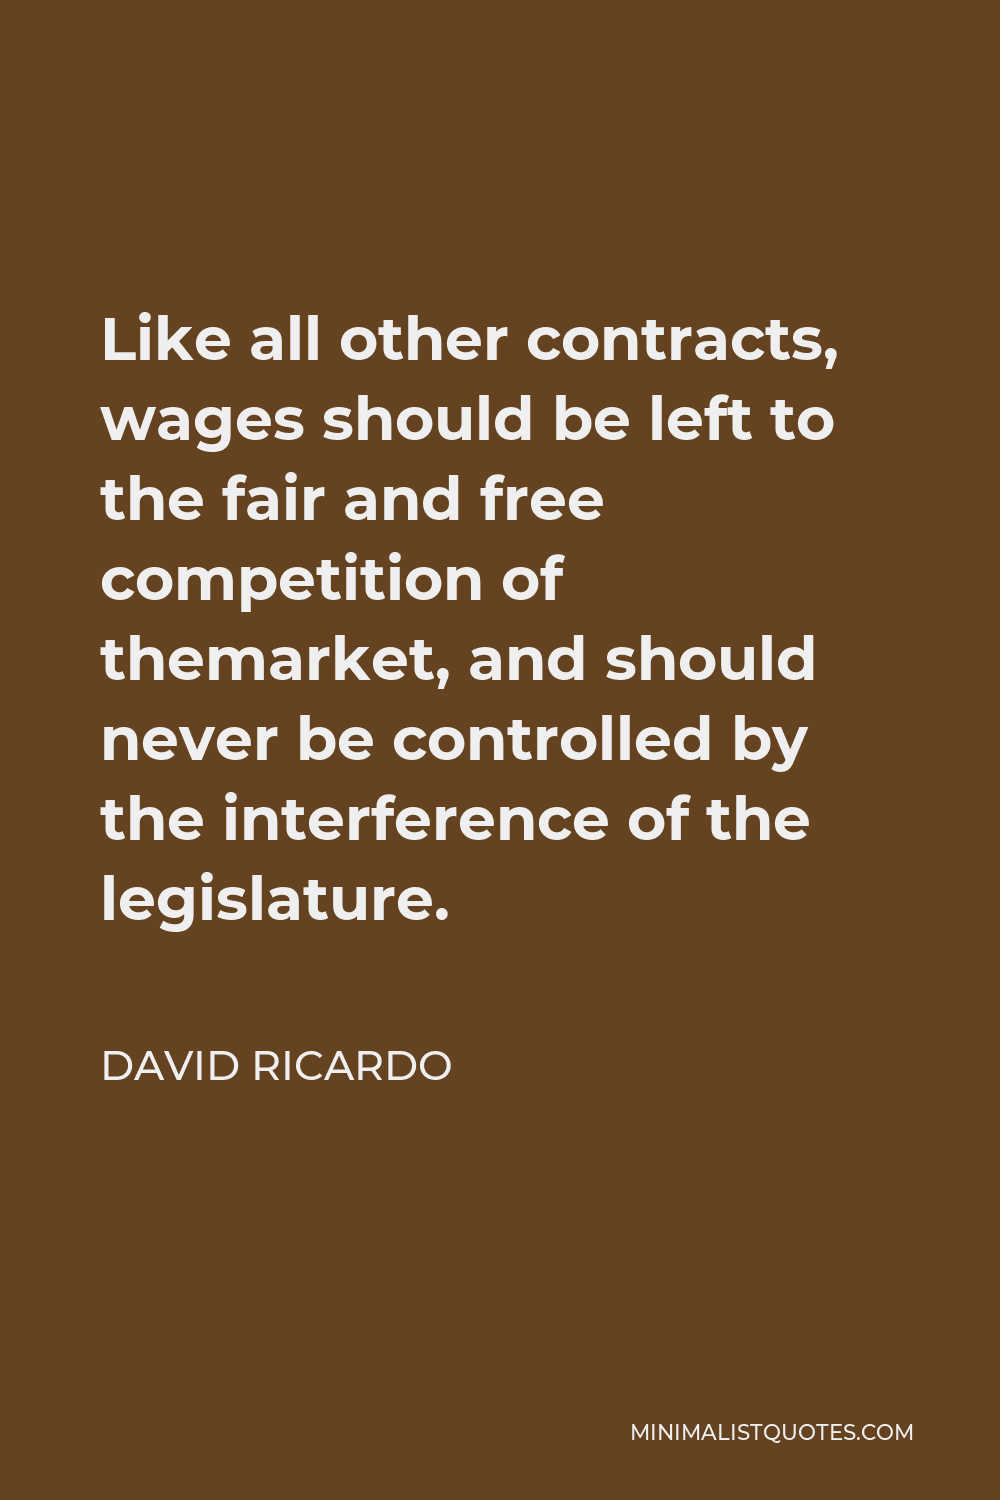 David Ricardo Quote - Like all other contracts, wages should be left to the fair and free competition of themarket, and should never be controlled by the interference of the legislature.